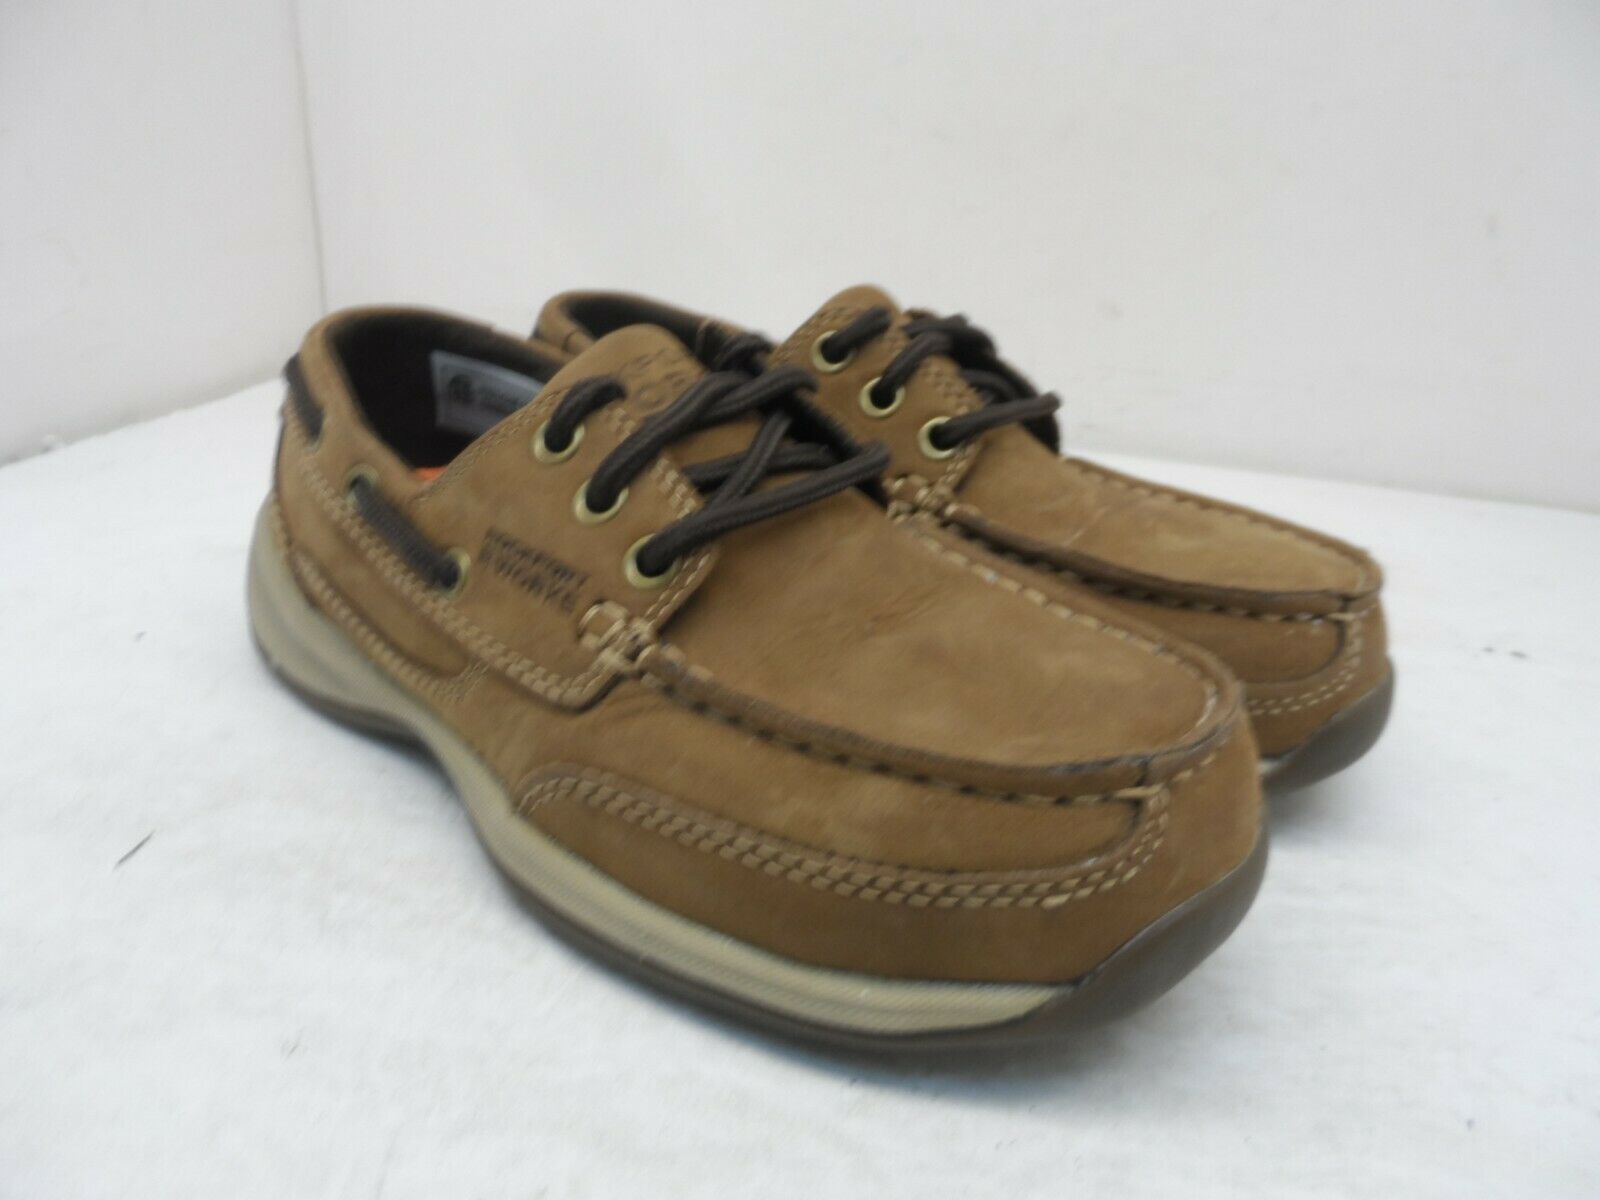 Primary image for Rockport Work Women's Sailing Club Steel-Toe Boat Shoes Brown Leather Size 6W